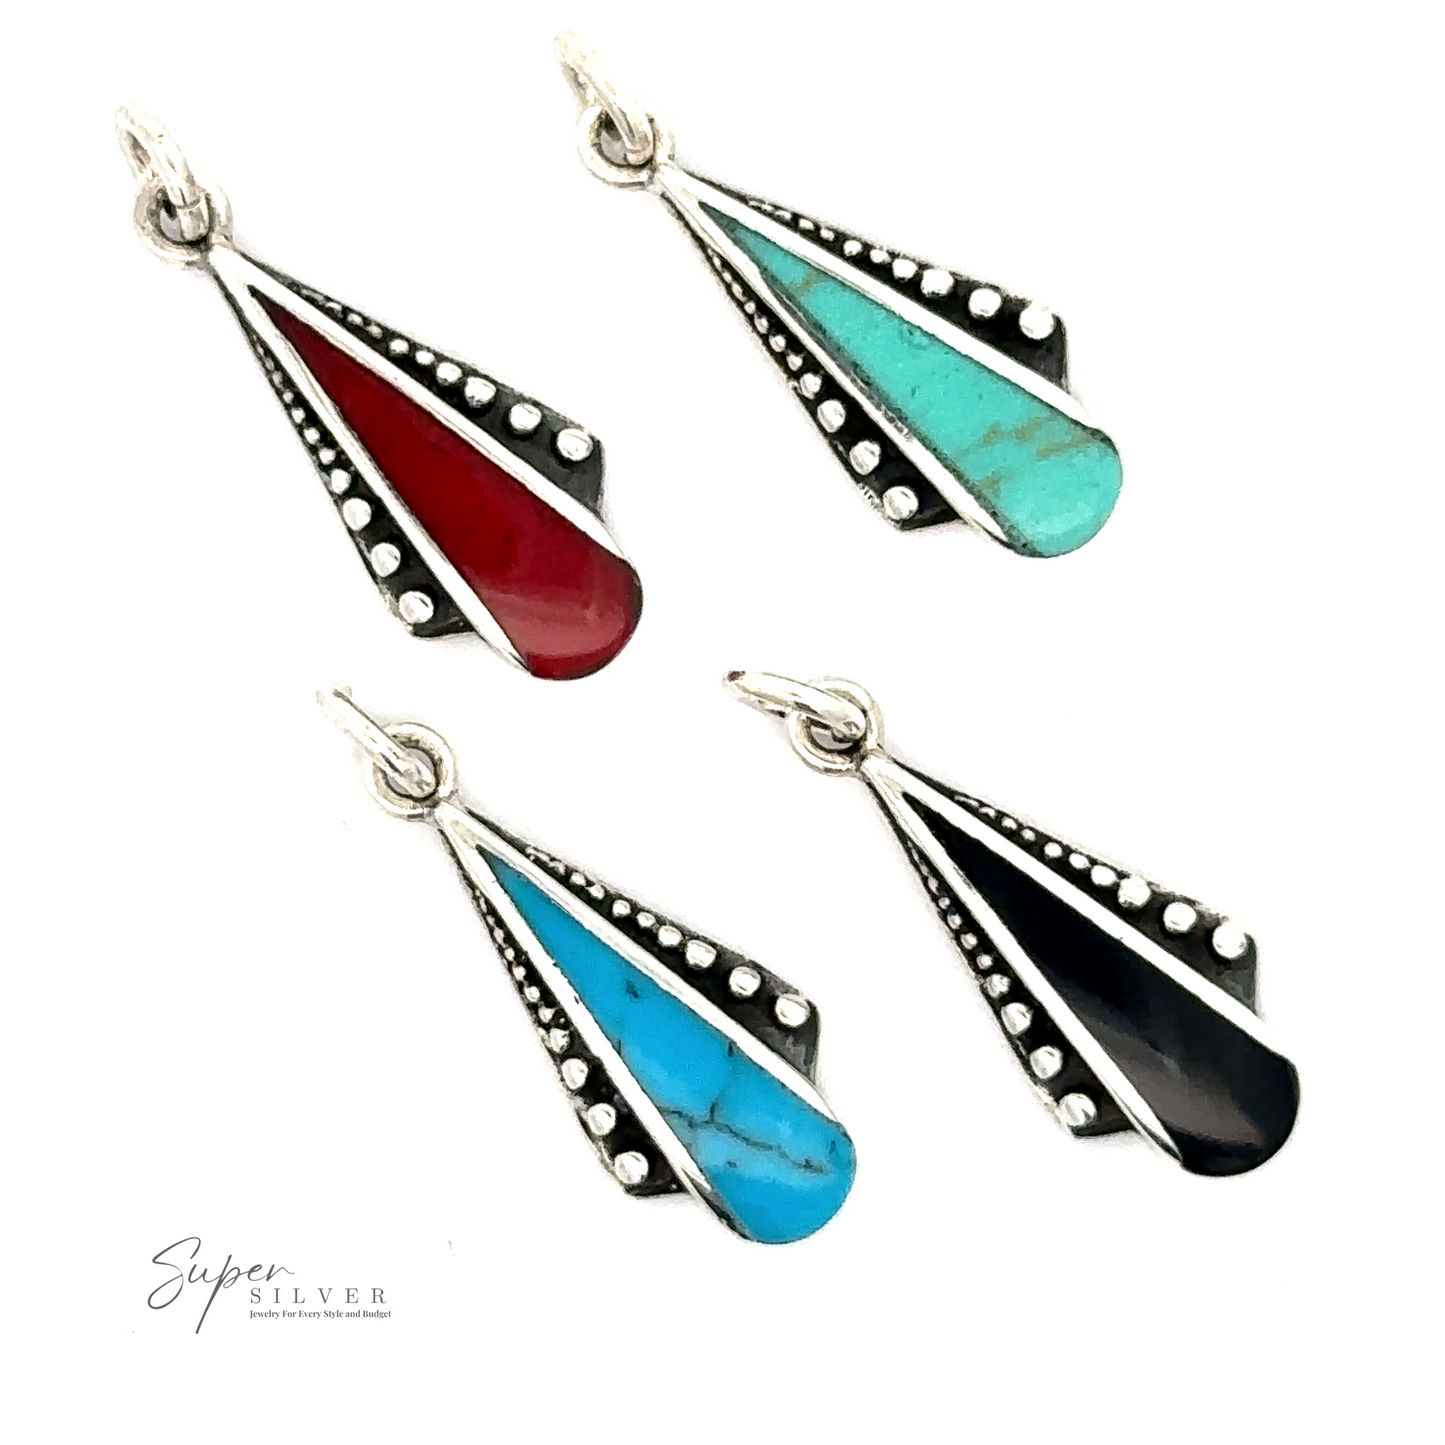 
                  
                    Four Teardrop Pendants with Inlaid Stones and Ball Border in red, turquoise, blue, and black inlaid stones, set in sterling silver with dot detailing, displayed on a white background.
                  
                